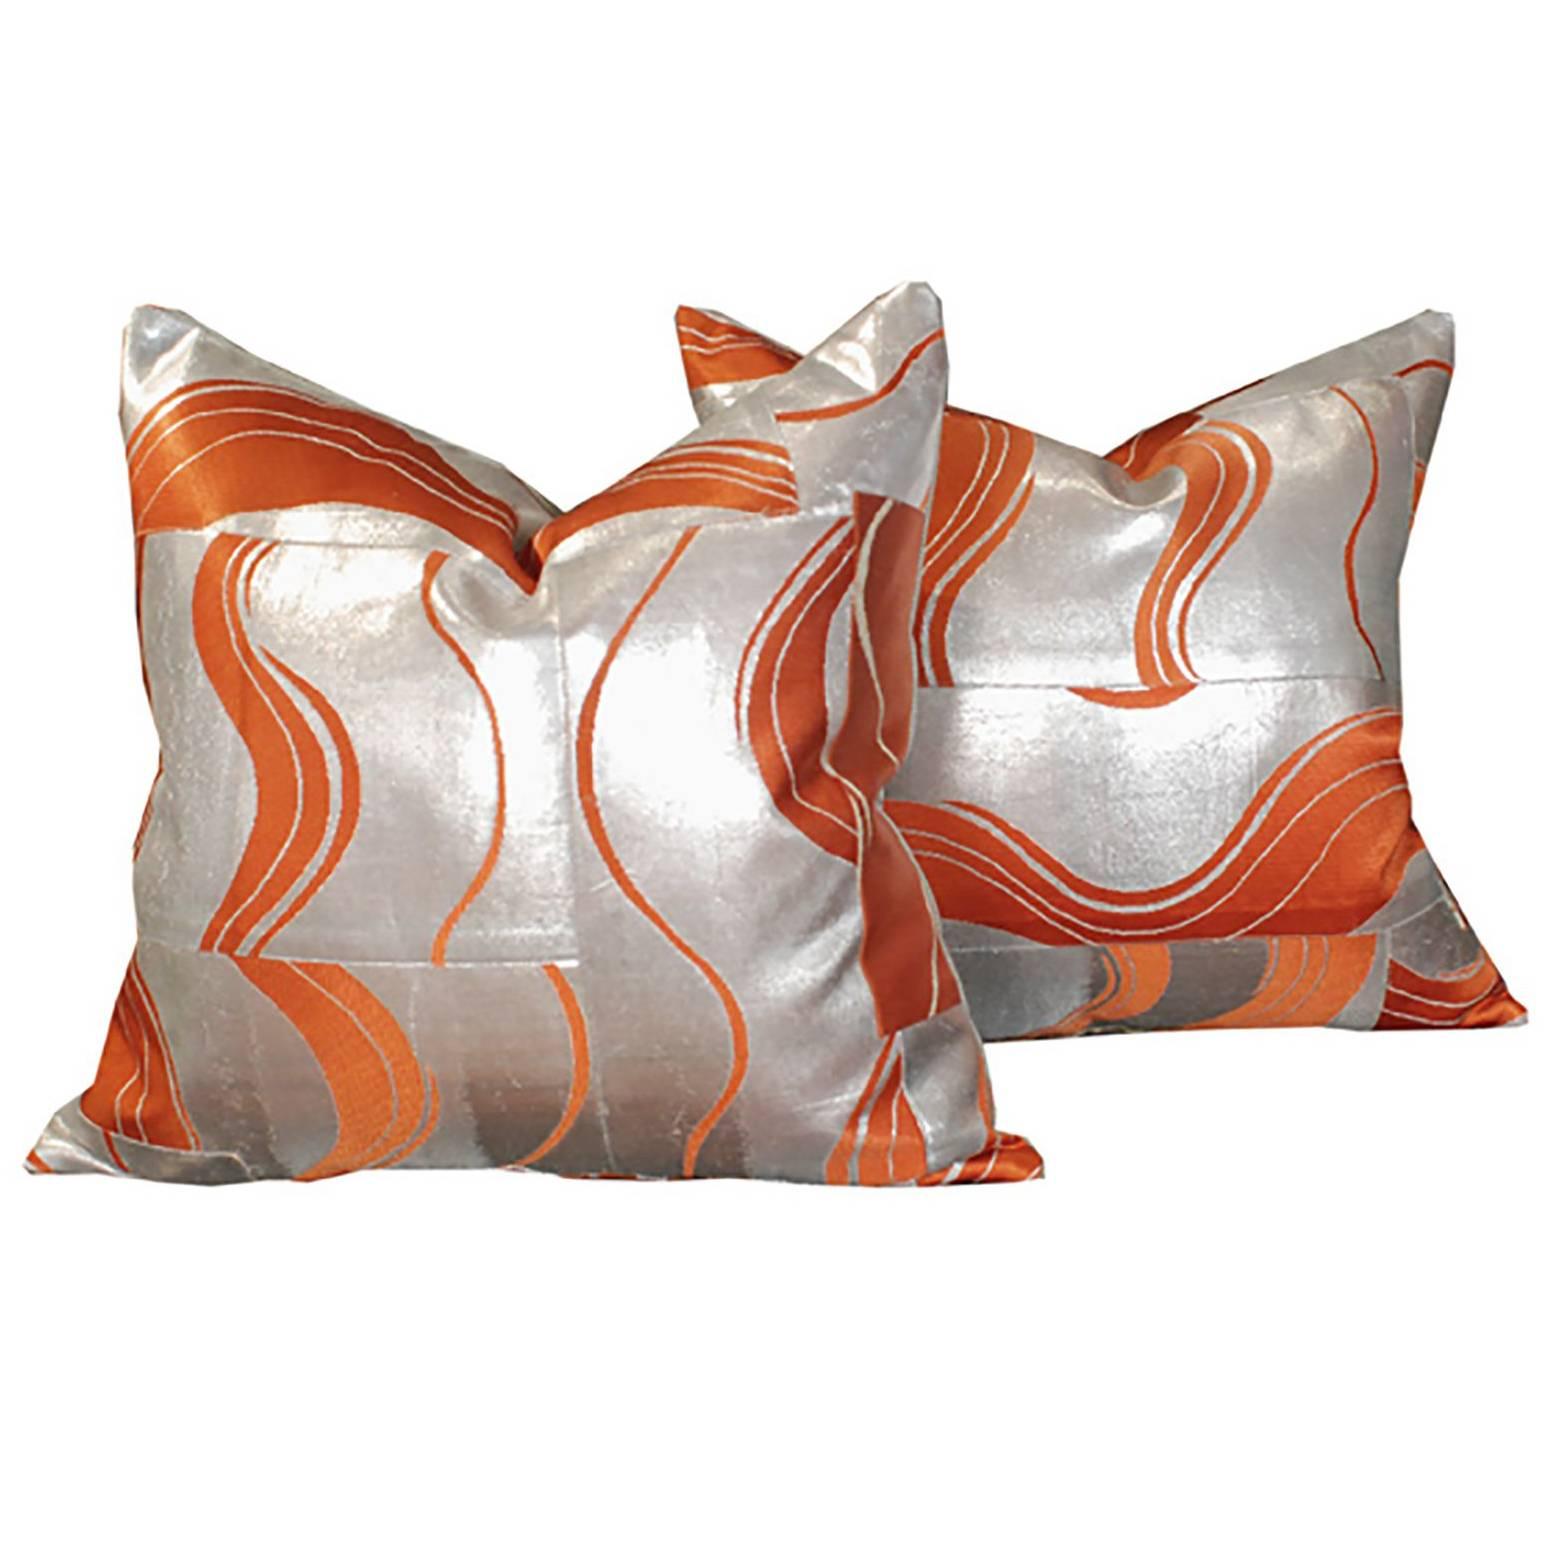 Pair of Japanese Obi Pillows in Silver and Orange